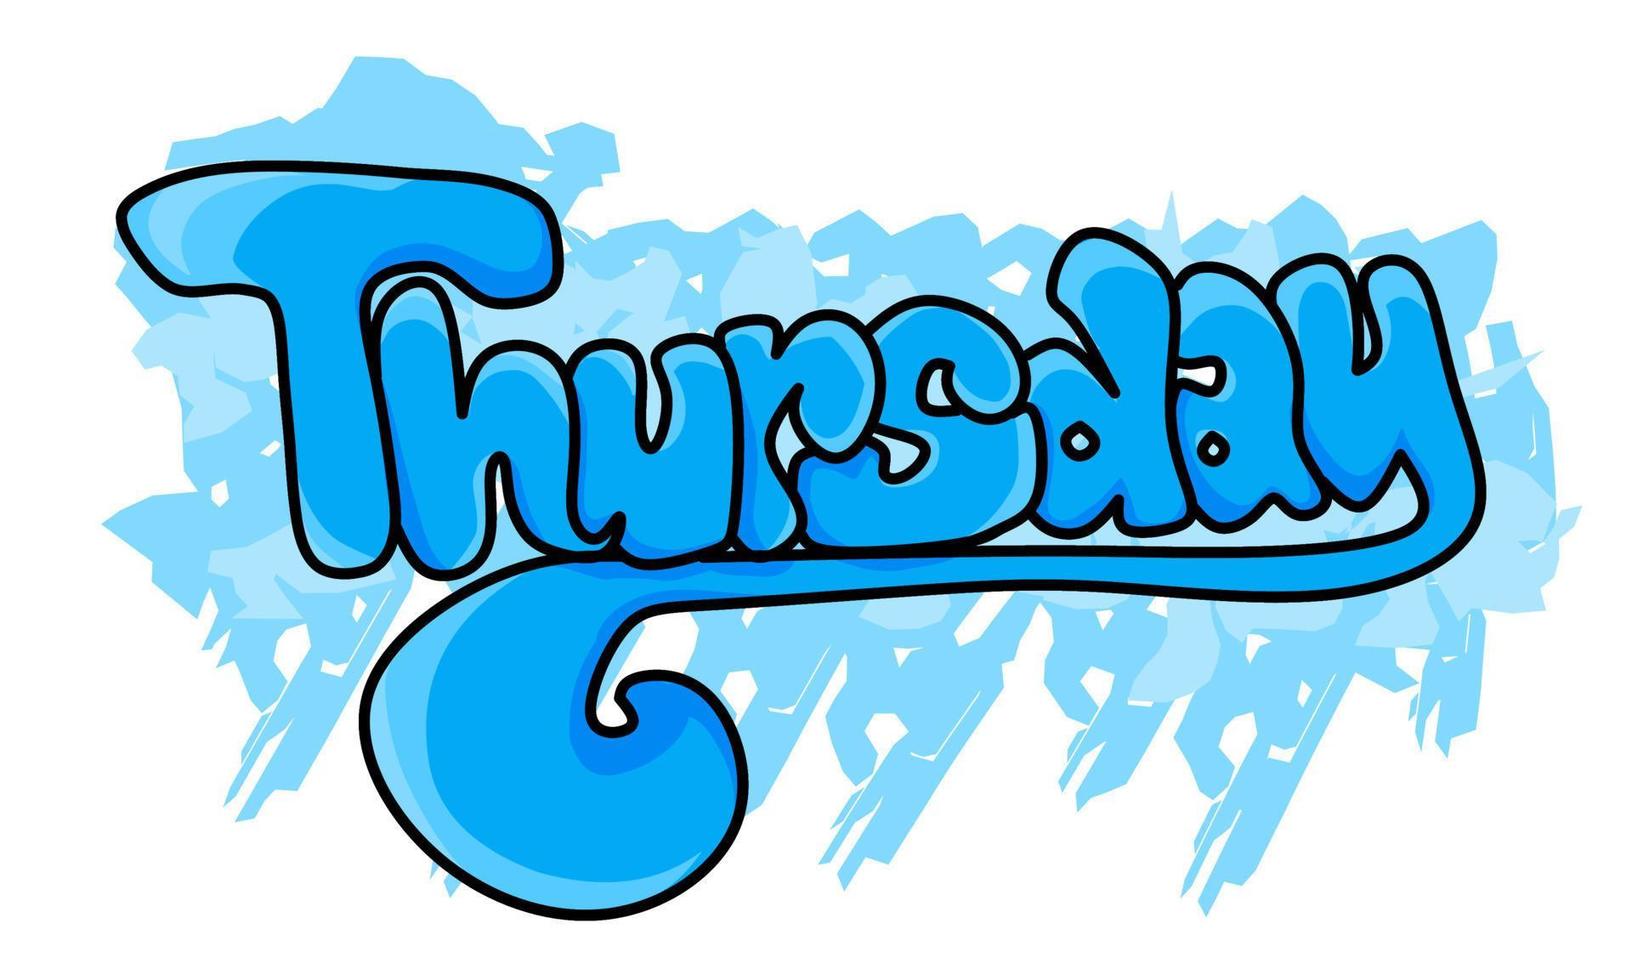 Image of thursday name graffiti in blue and white background vector